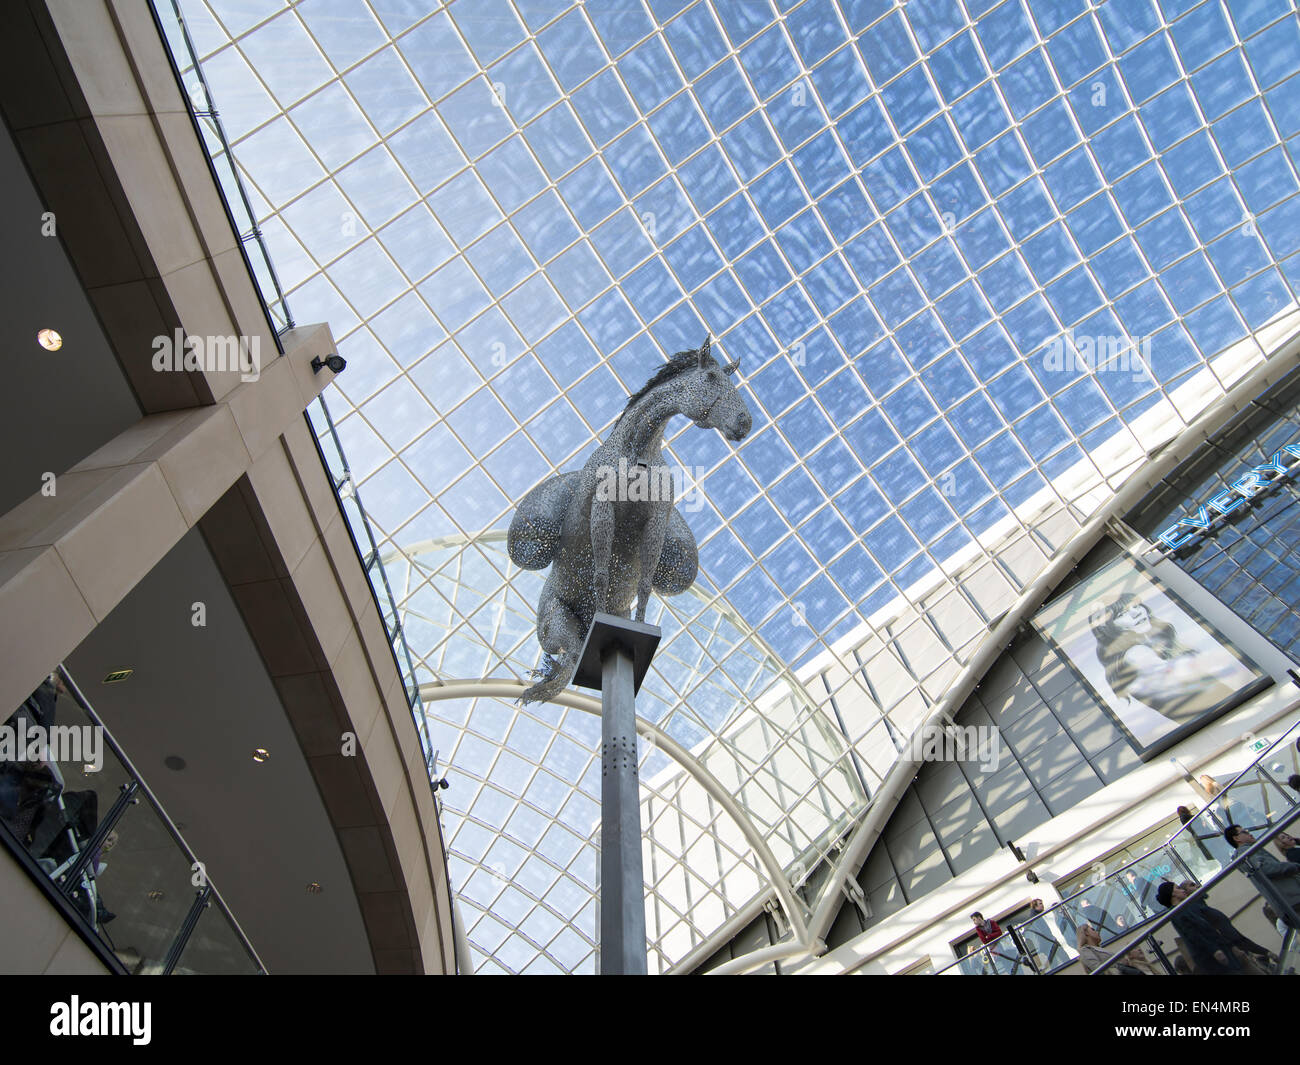 The sculpture Equus Altus - a packhorse carrying cloth at Trinity Leeds - Shopping Center, Yorkshire, England. Stock Photo